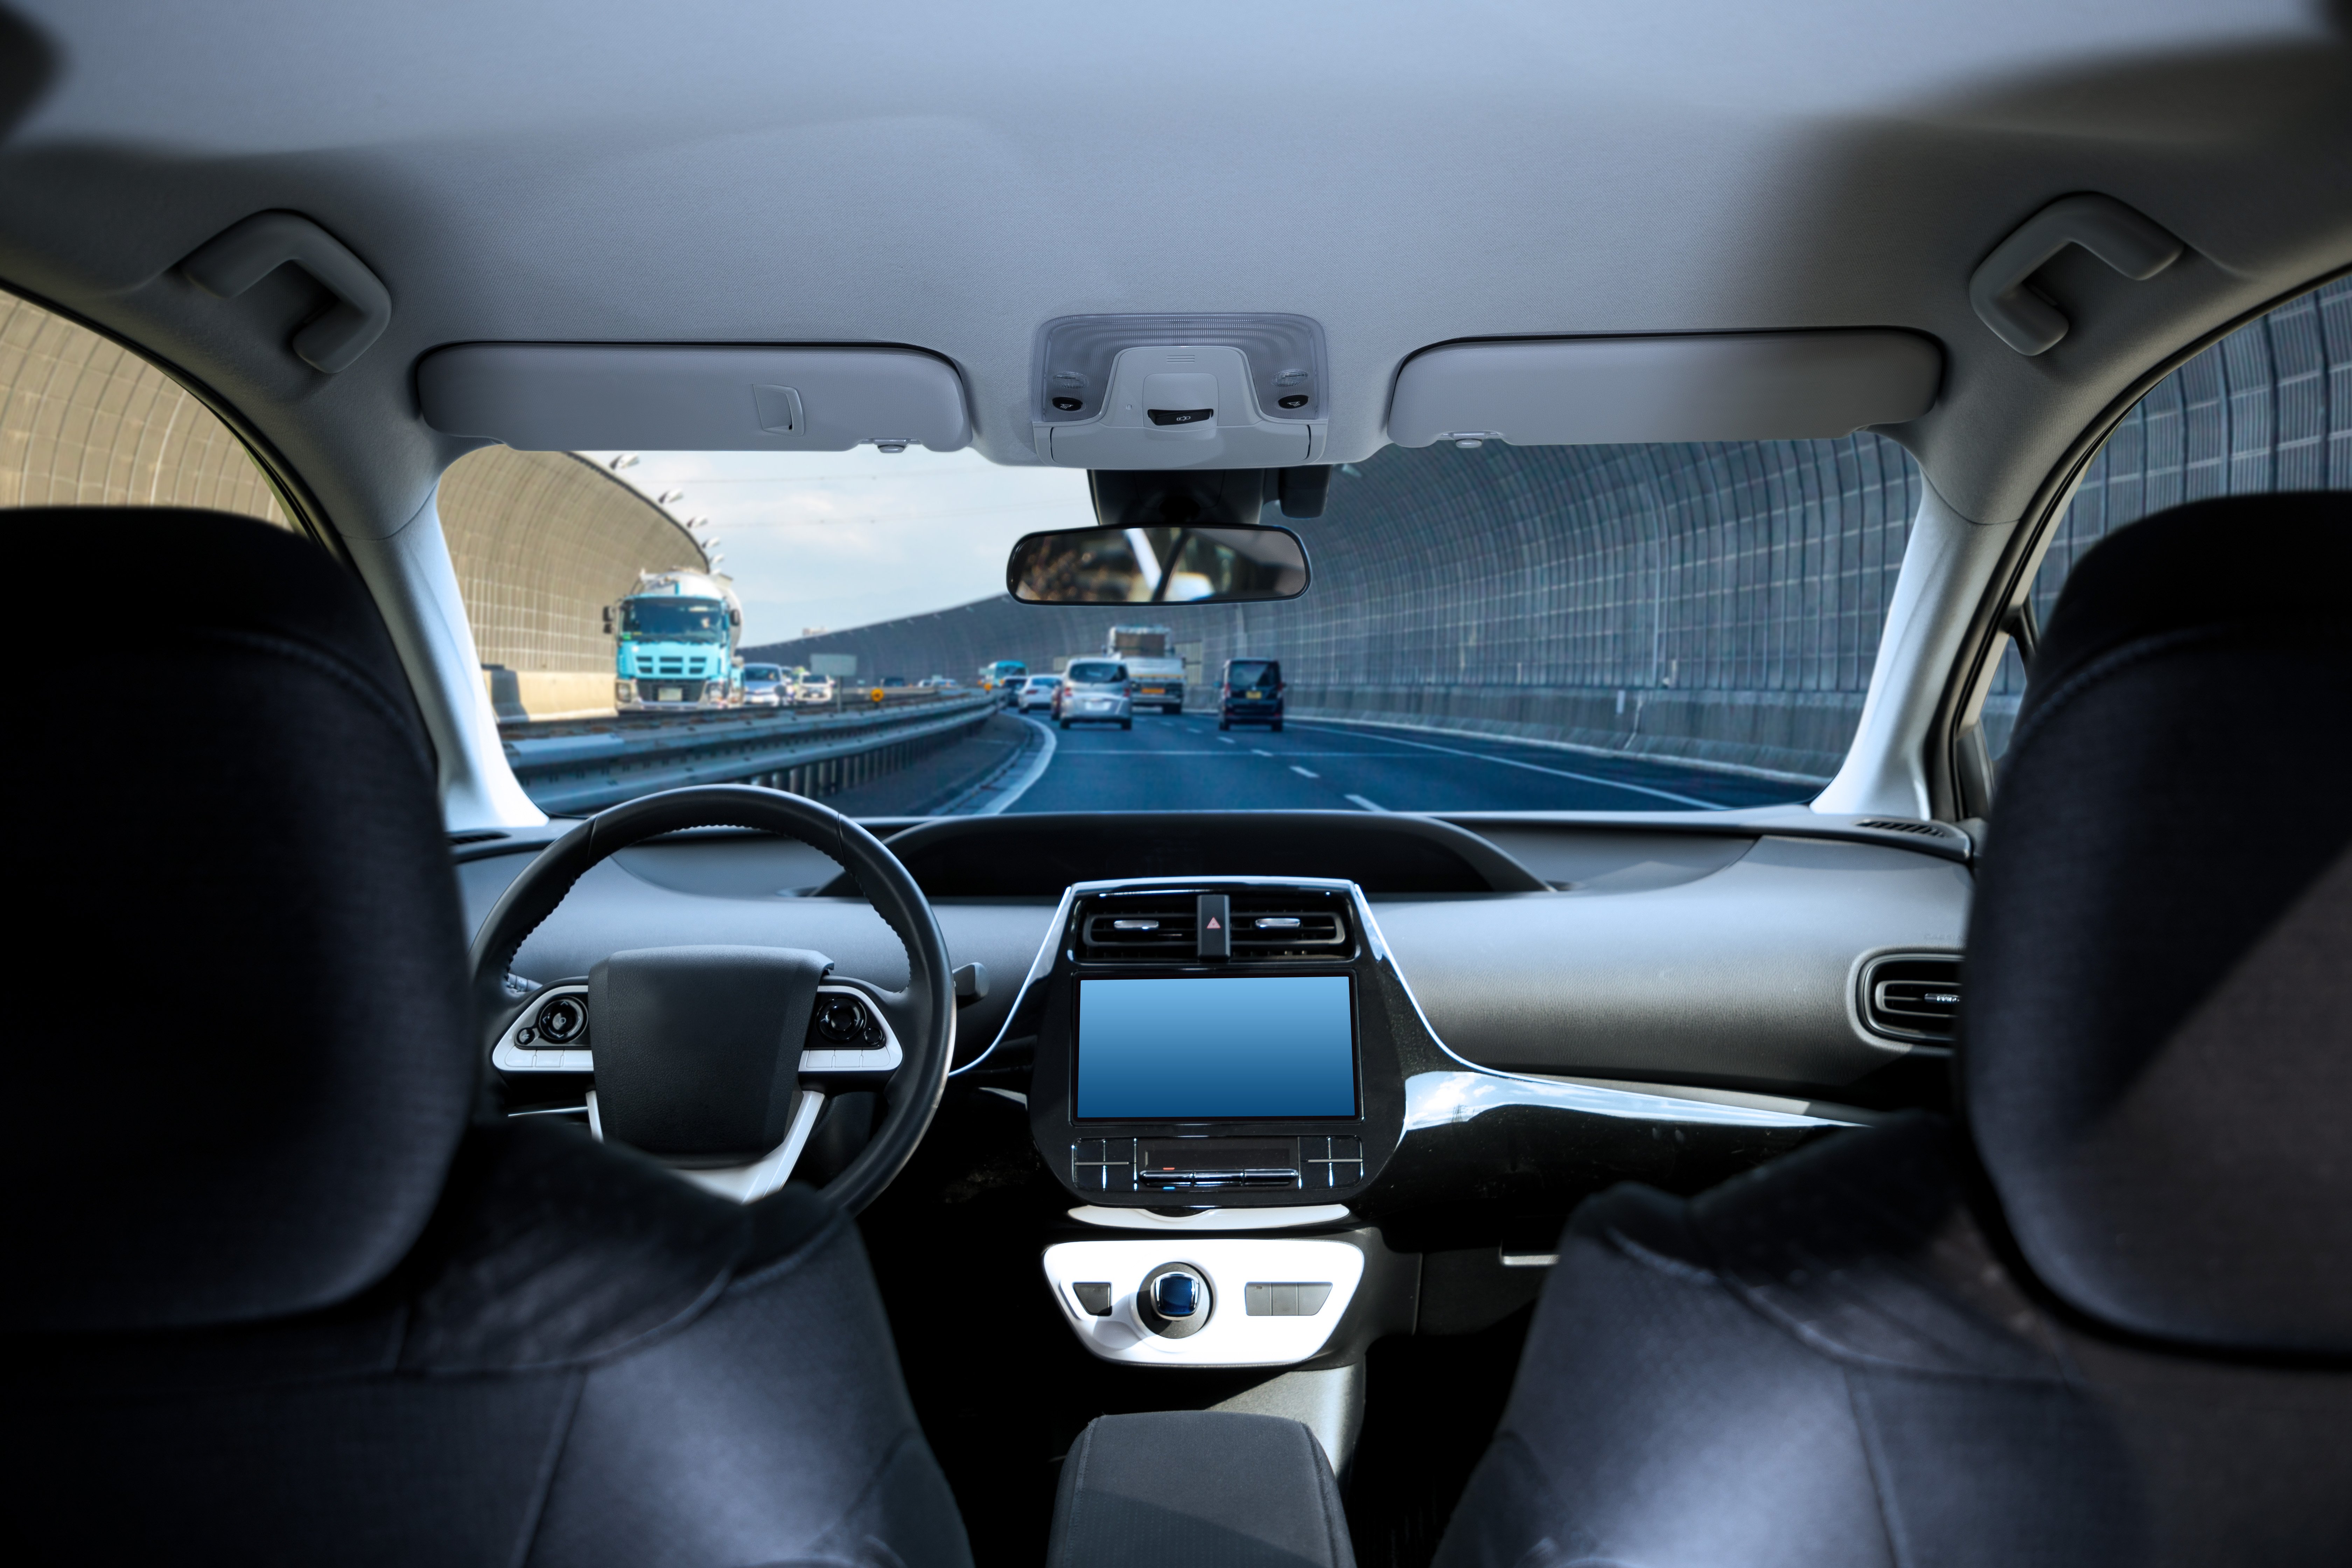 Safety, security: Inextricably entwined in autonomous vehicle design